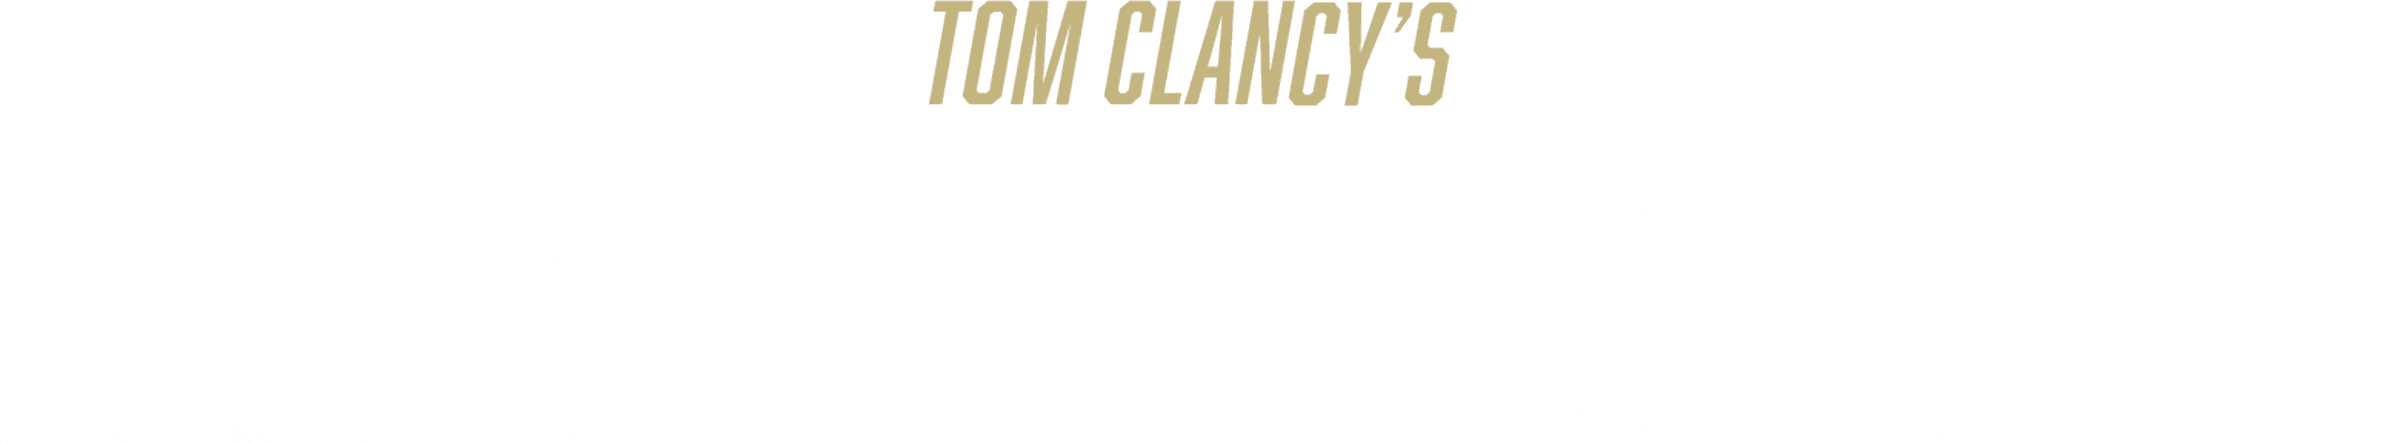 Tom Clancy's Without Remorse logo